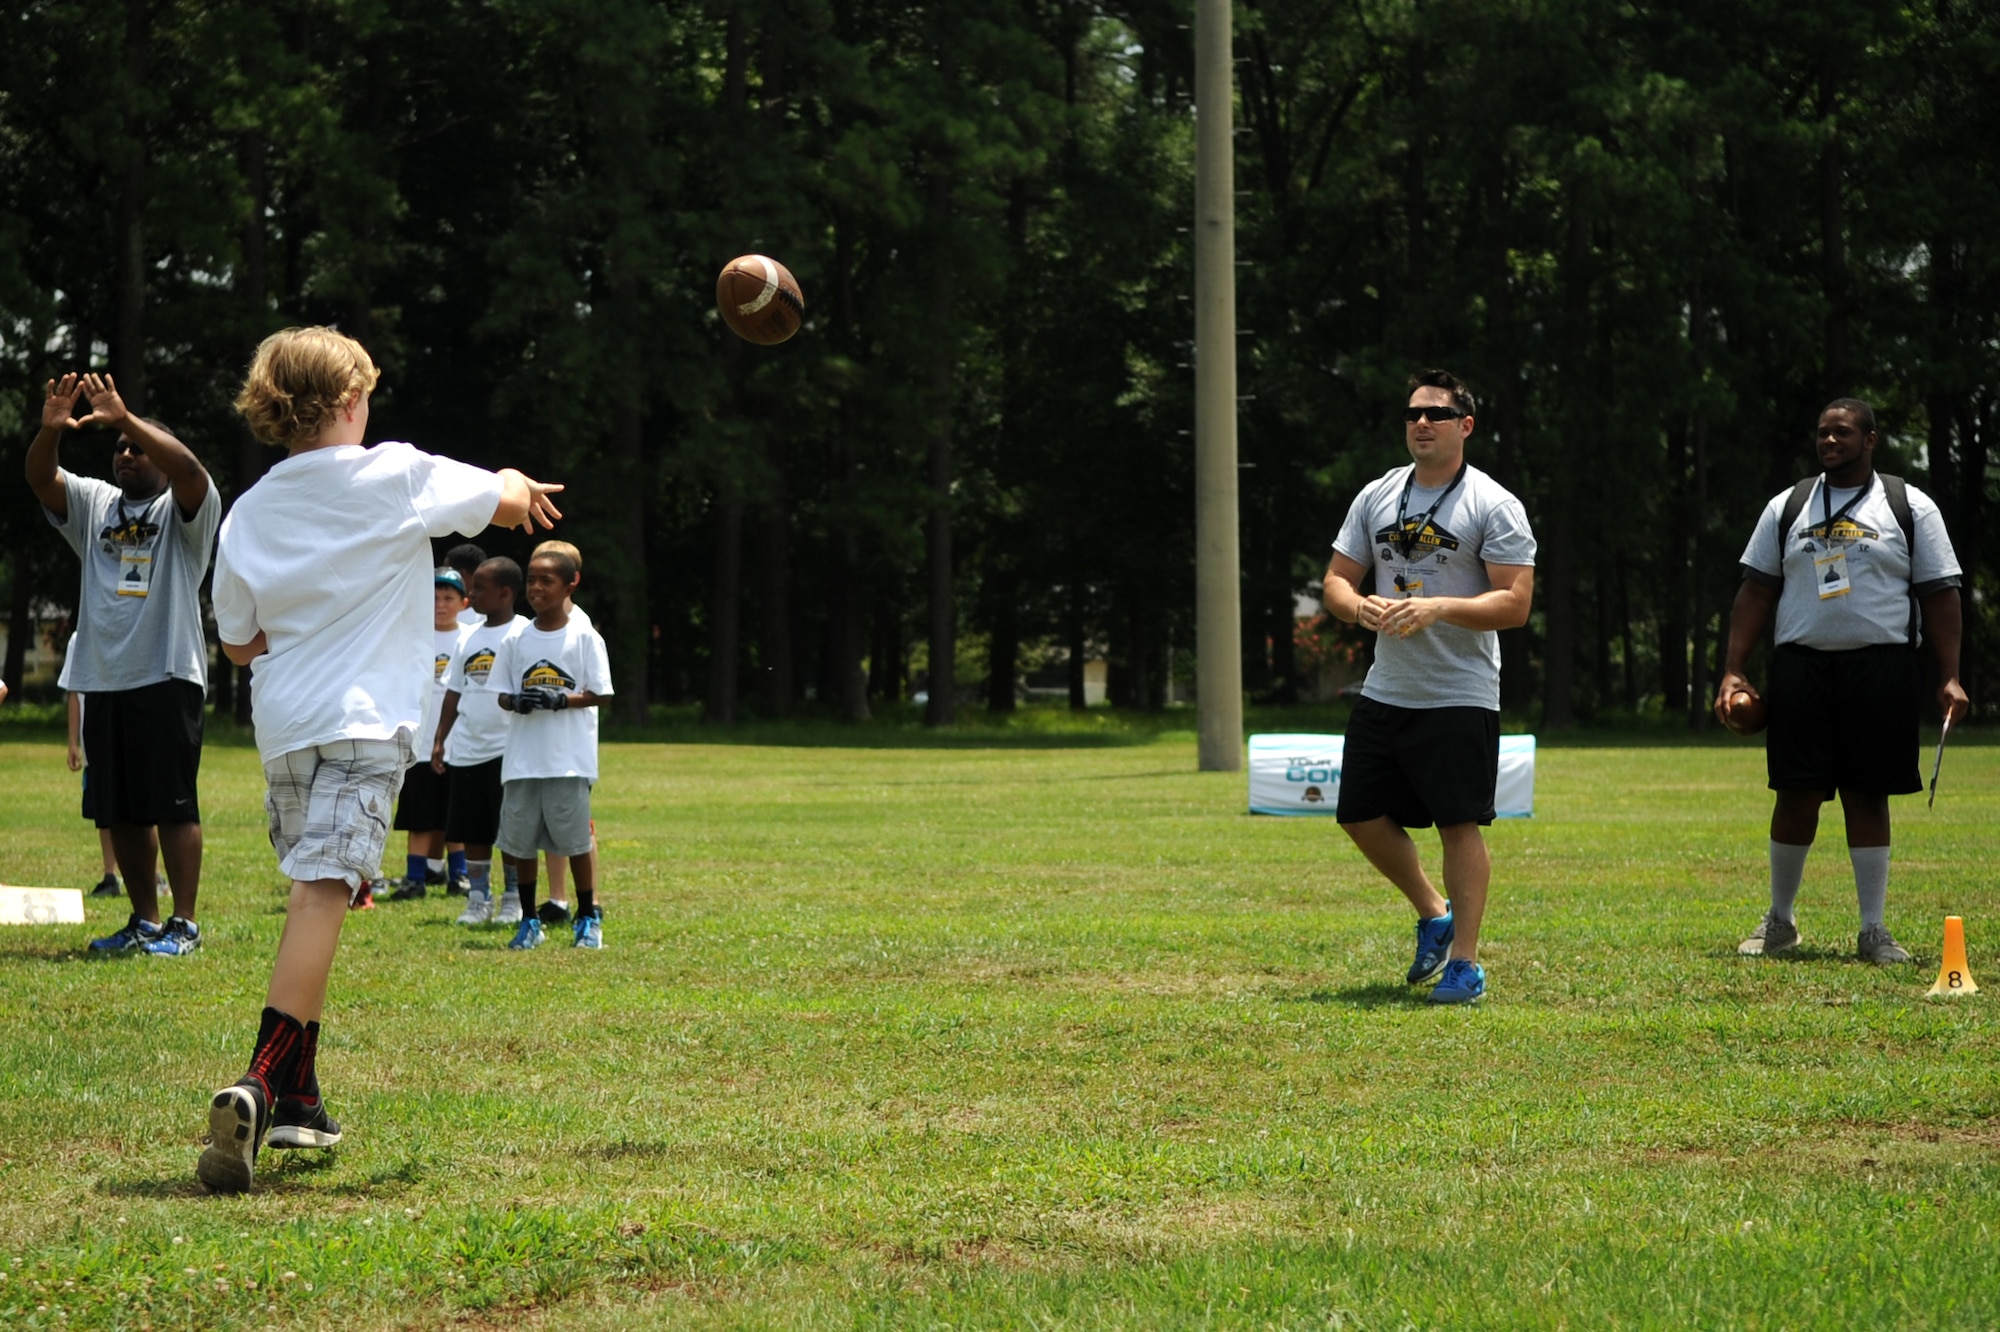 A young athlete practices passing drills with a volunteer coach during a National Football League ProCamp, July 16, 2015, at Seymour Johnson Air Force Base, North Carolina. More than 100 children turned out for the two-day camp. (U.S. Air Force photo/Senior Airman Ashley J. Thum)